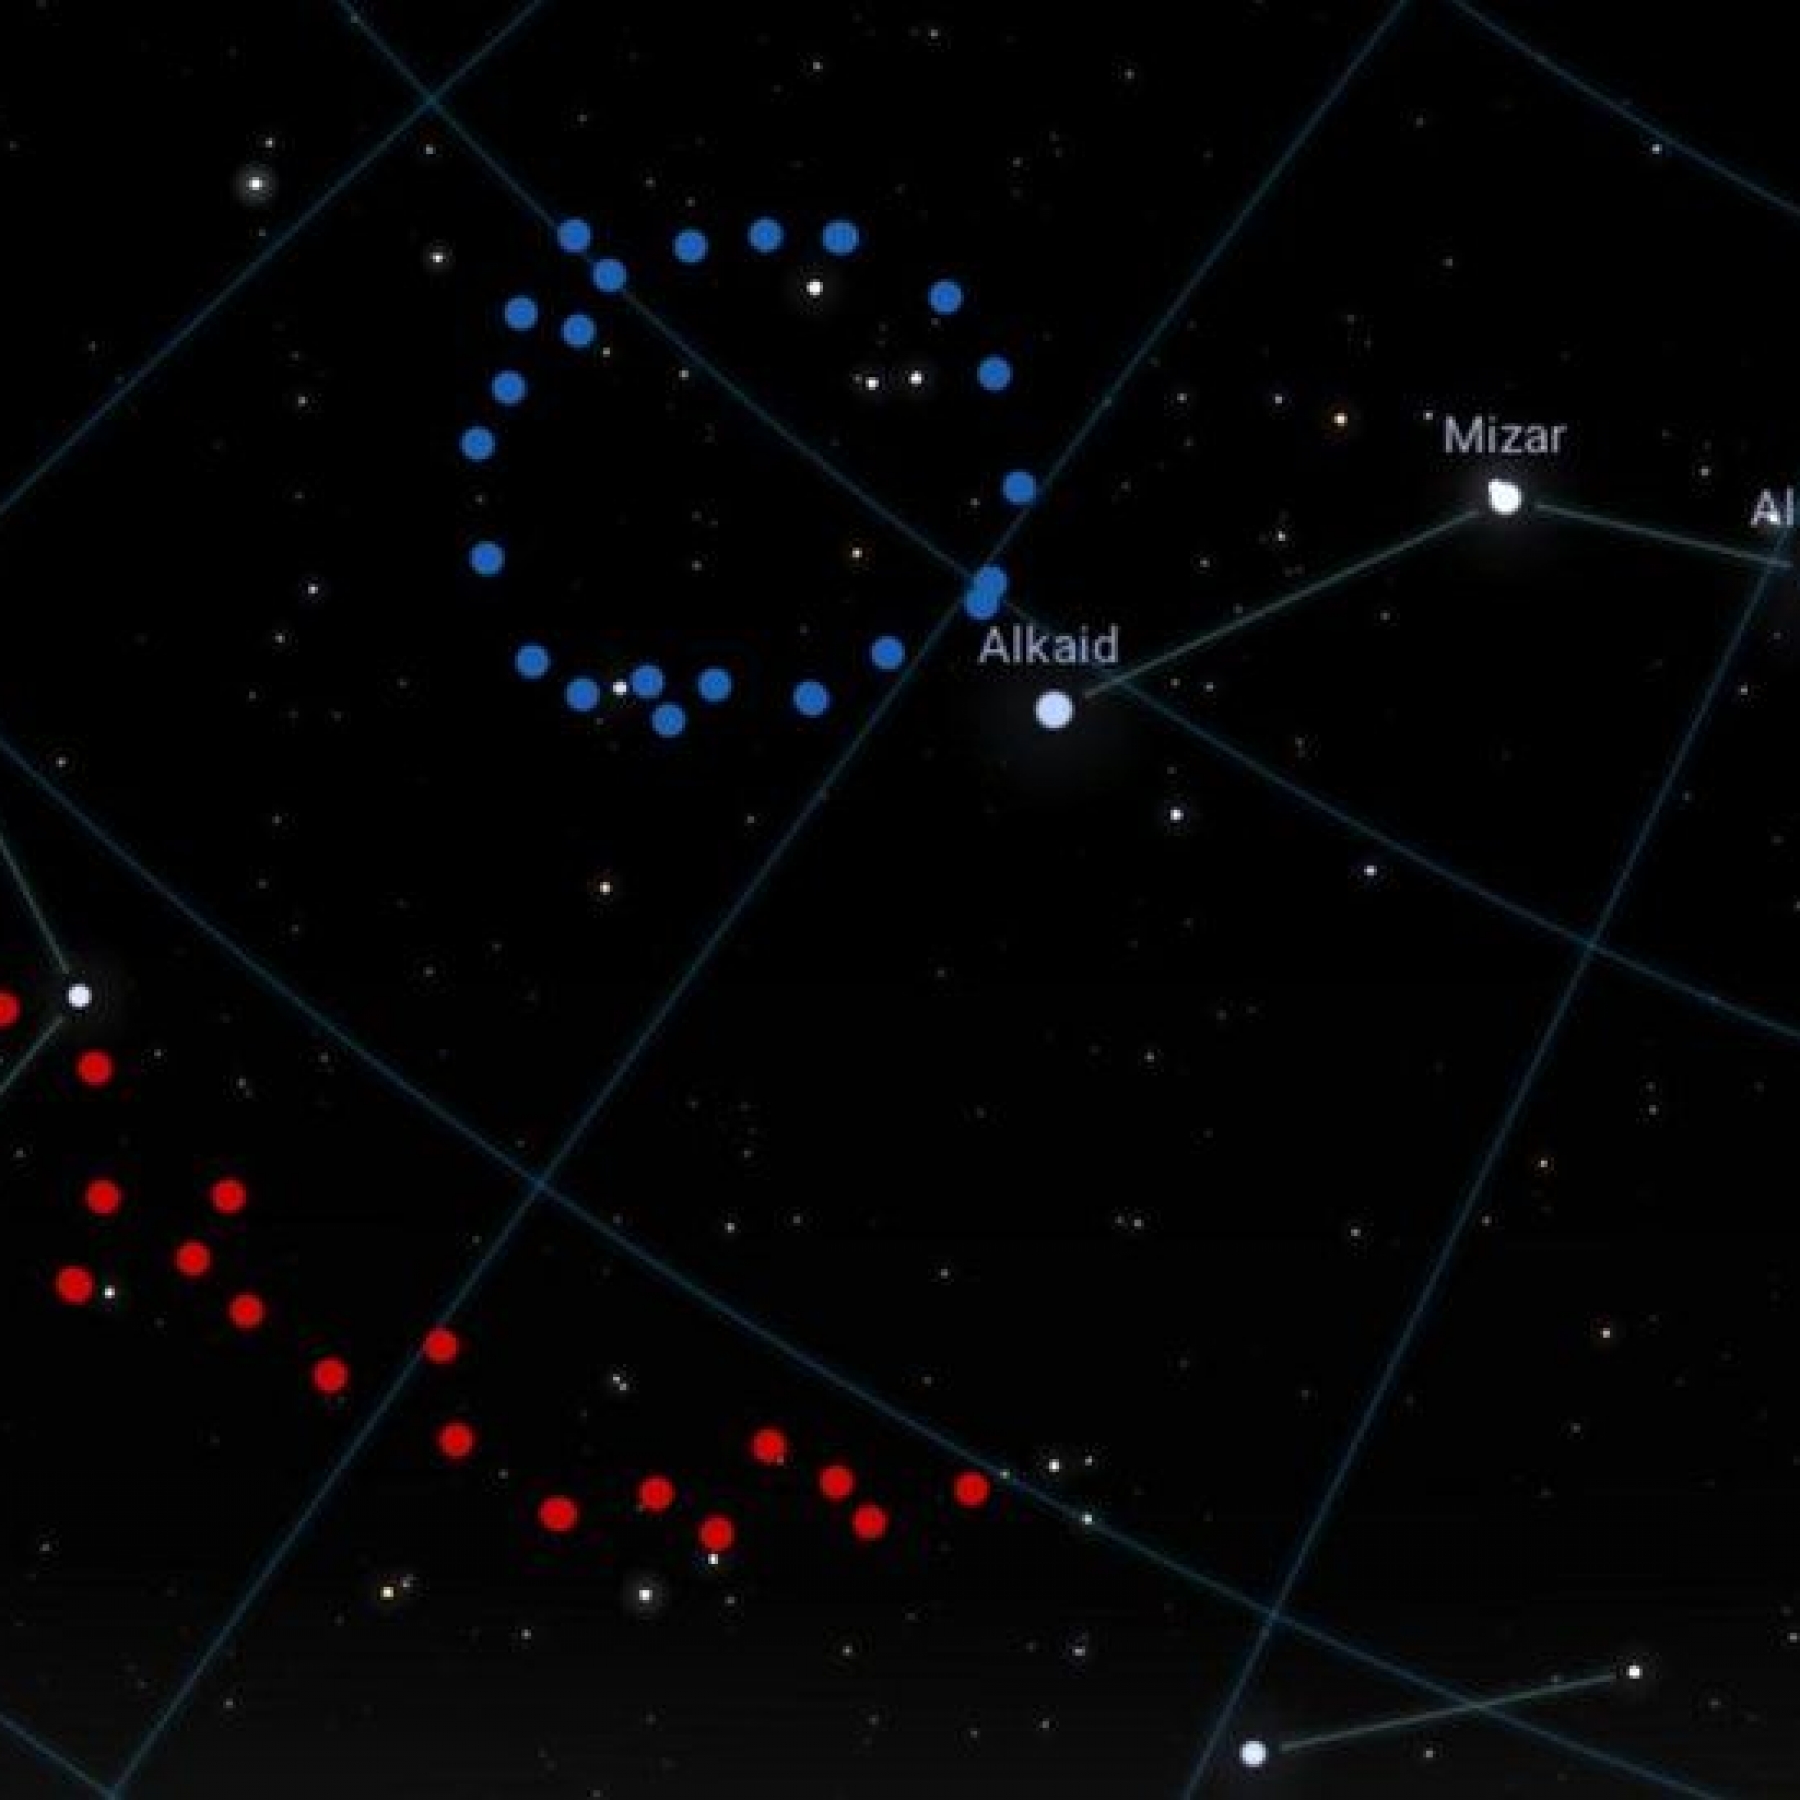 An artist's impression highlighting the positions of the Big Ring (in blue) and Giant Arc (shown in red) in the sky.